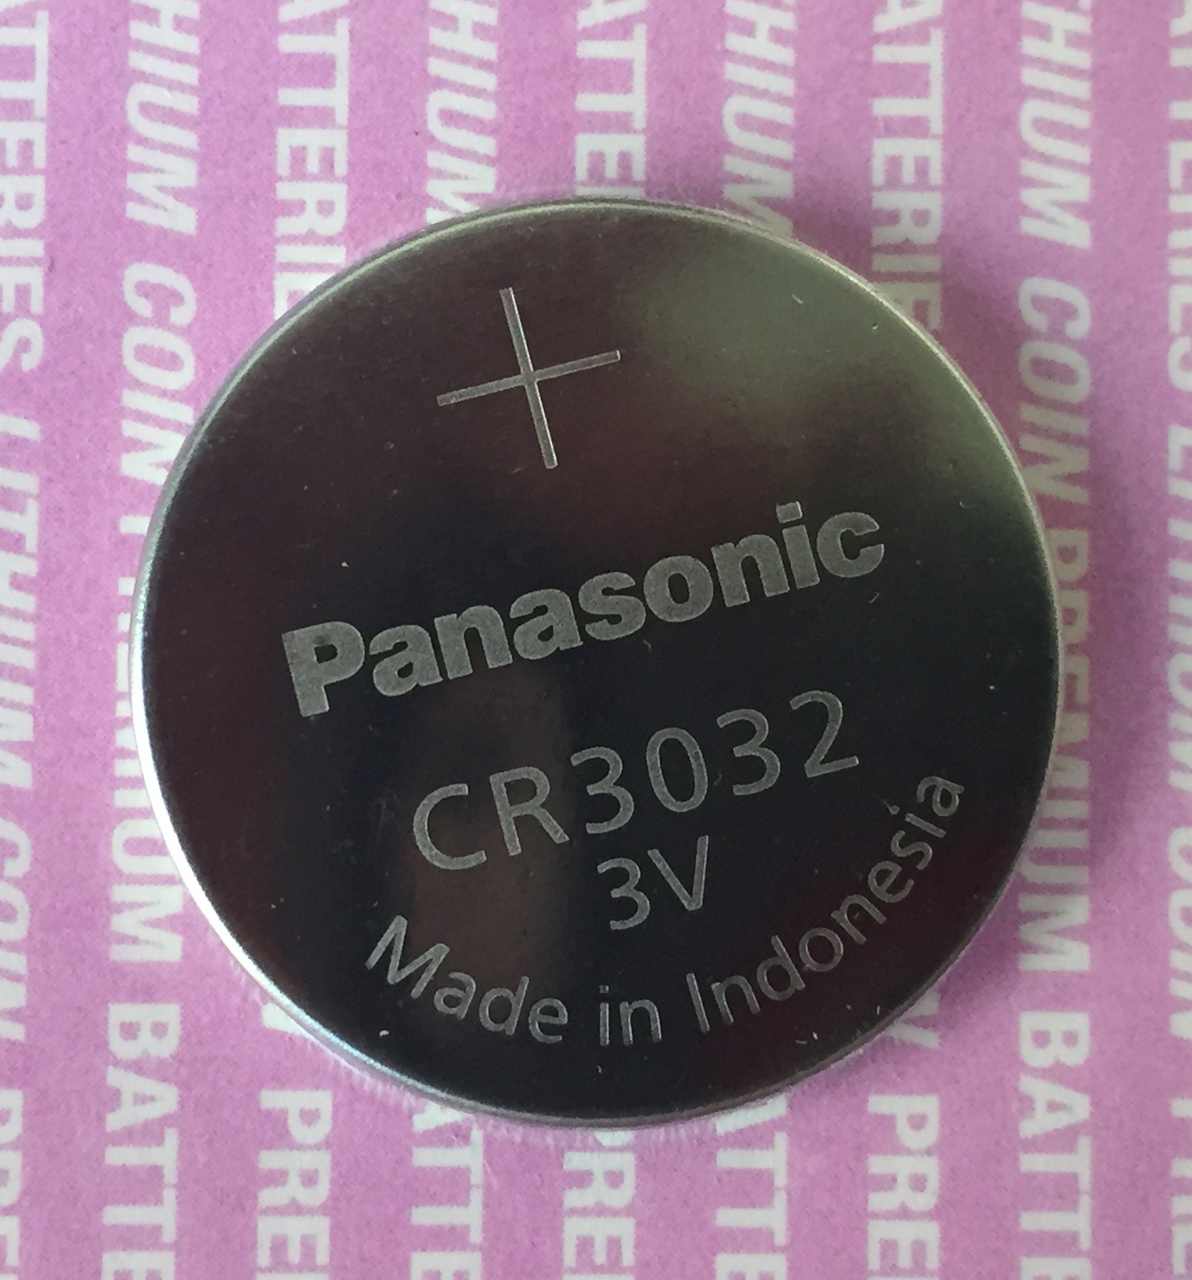 Panasonic CR3032 3V Lithium Coin Battery - 2 Pack + FREE SHIPPING!